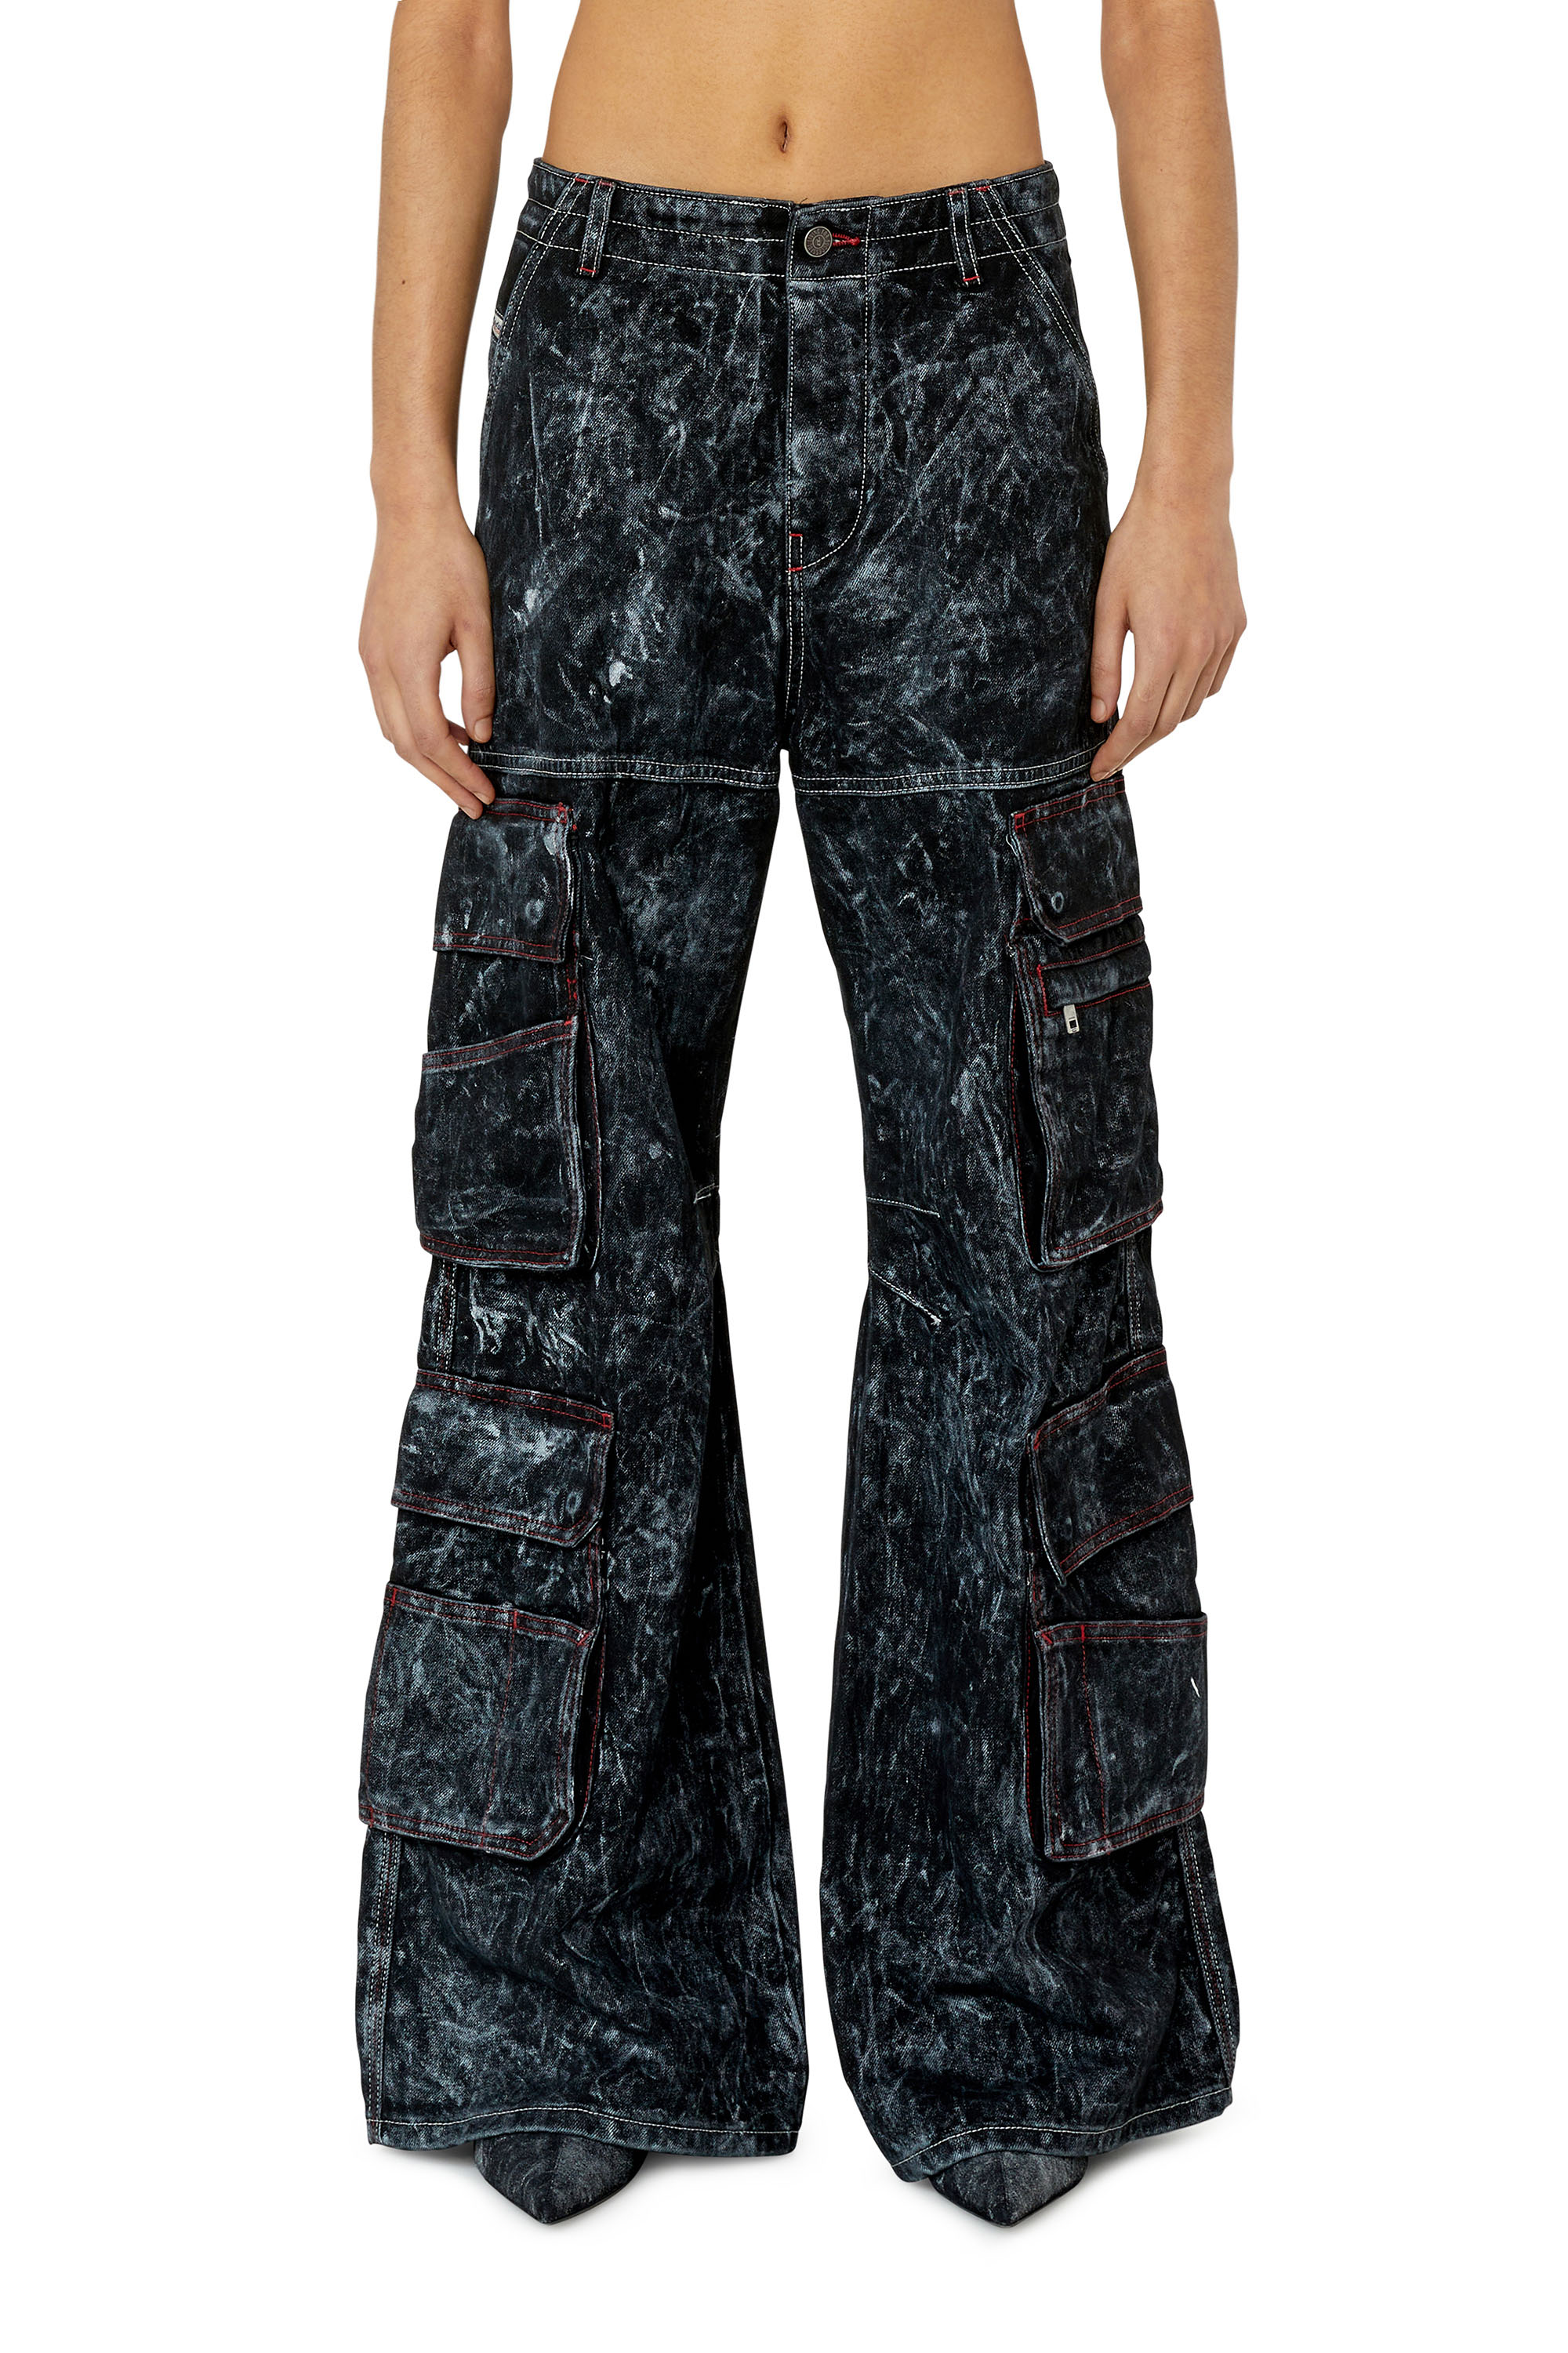 Women's Jeans and Apparel: Discover our Collection | Diesel®